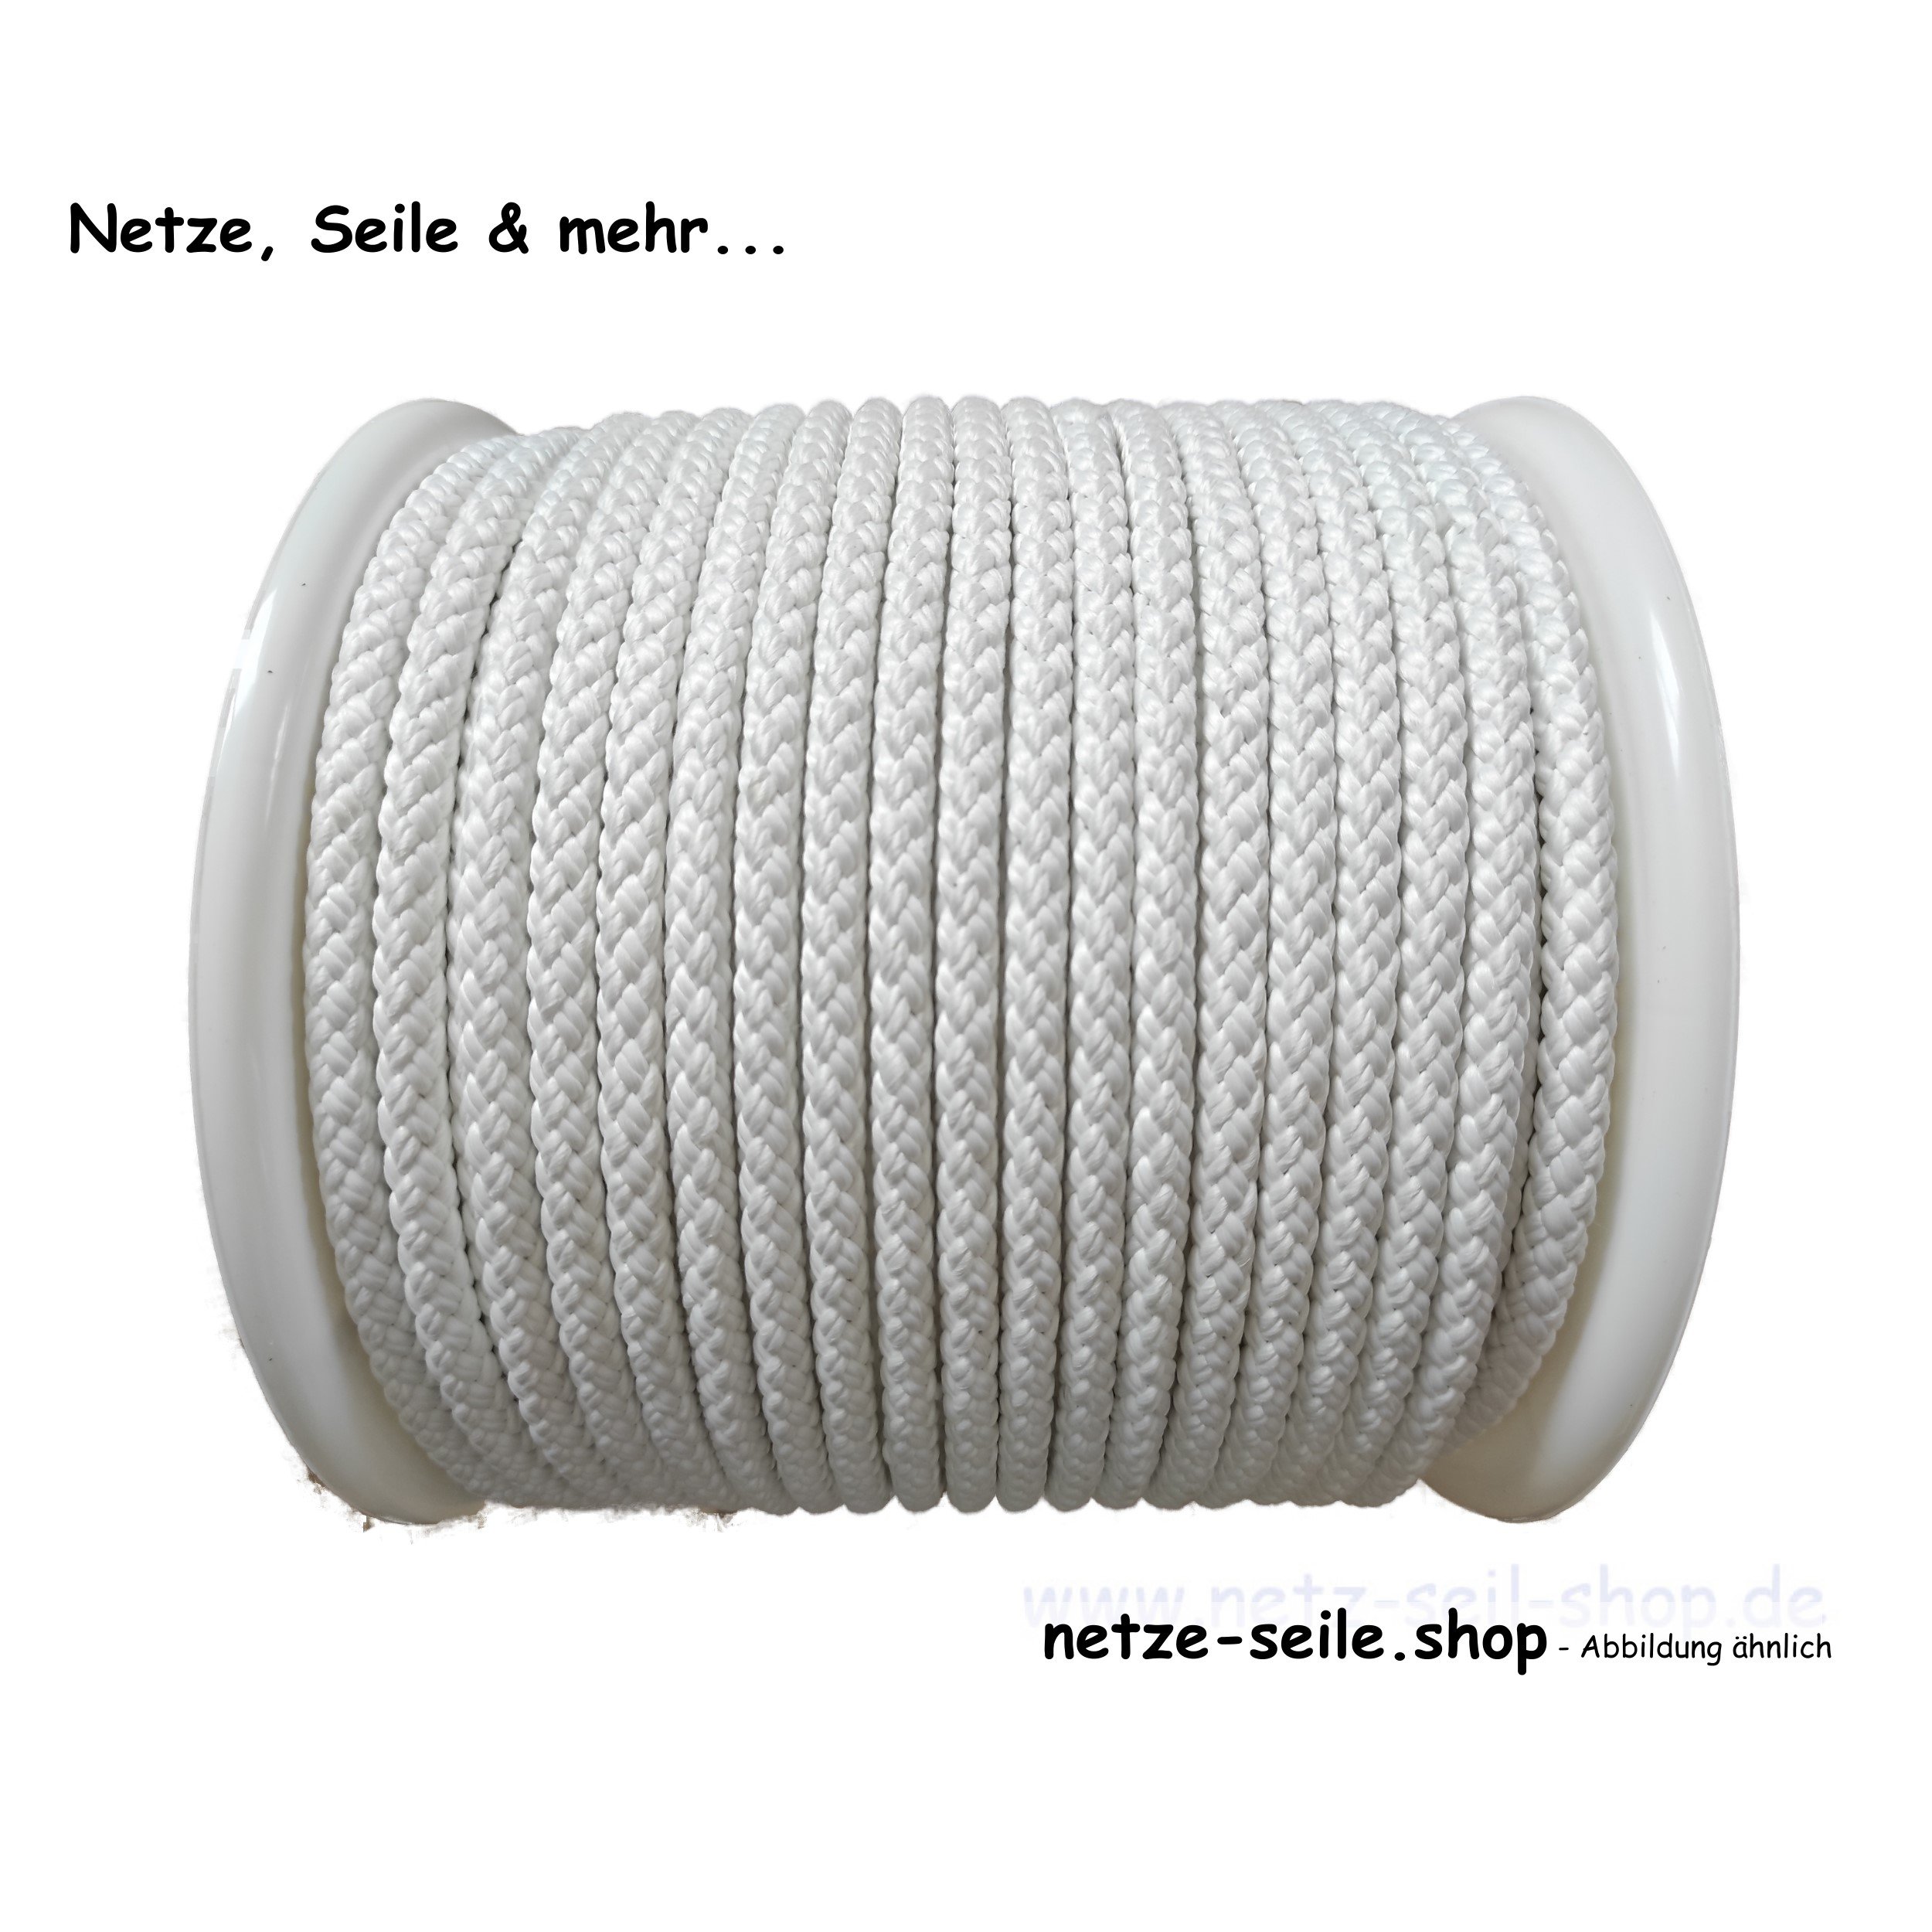 Nylon rope braided with core Ø 10mm, length 100m, color white